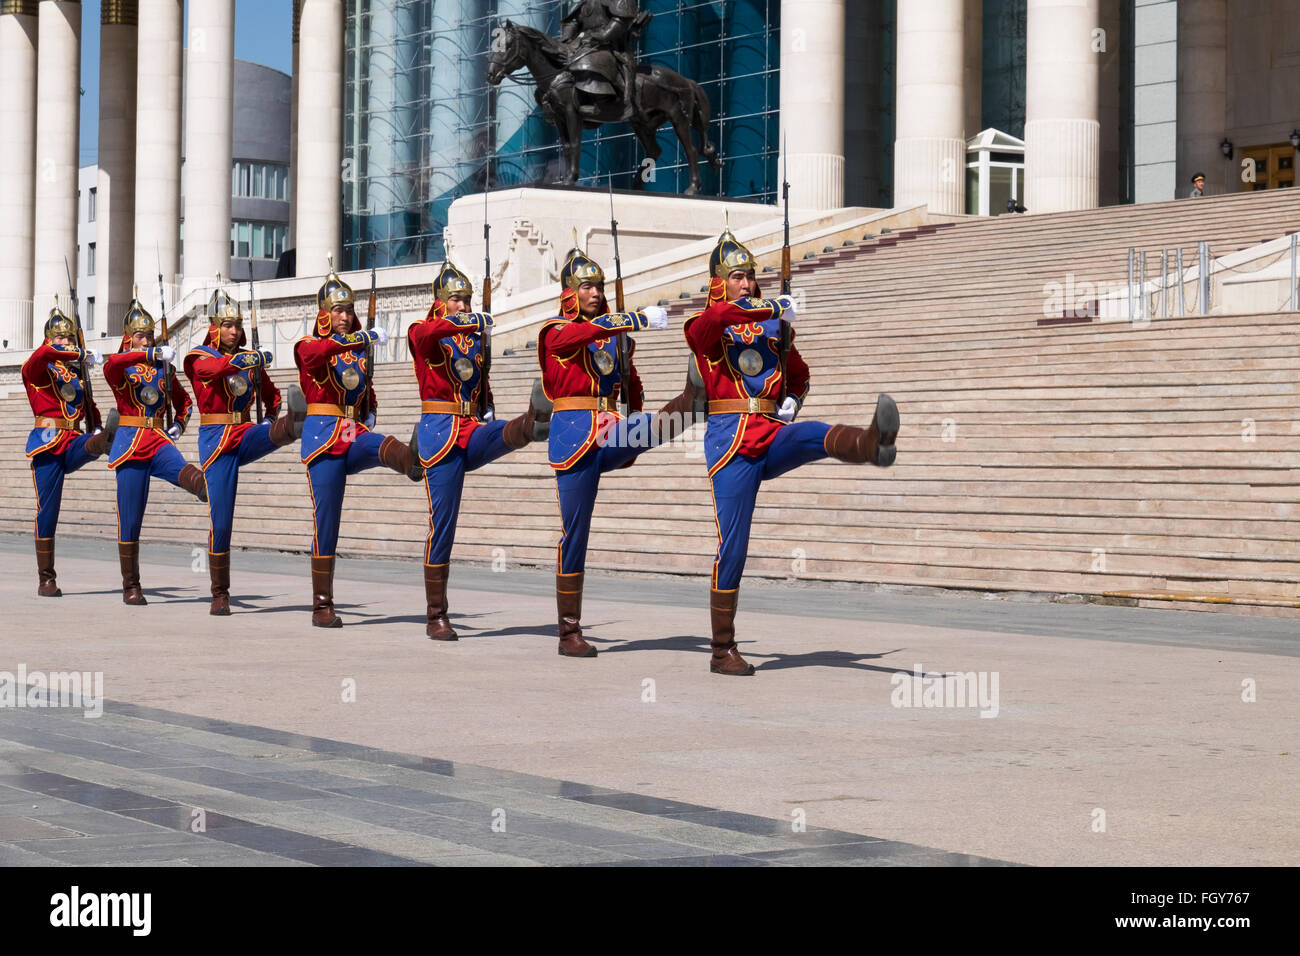 Asia, Mongolia, Ulaanbaatar, Changing of the guard in front of Mongolian National Parliament building. Editorial Only. Stock Photo